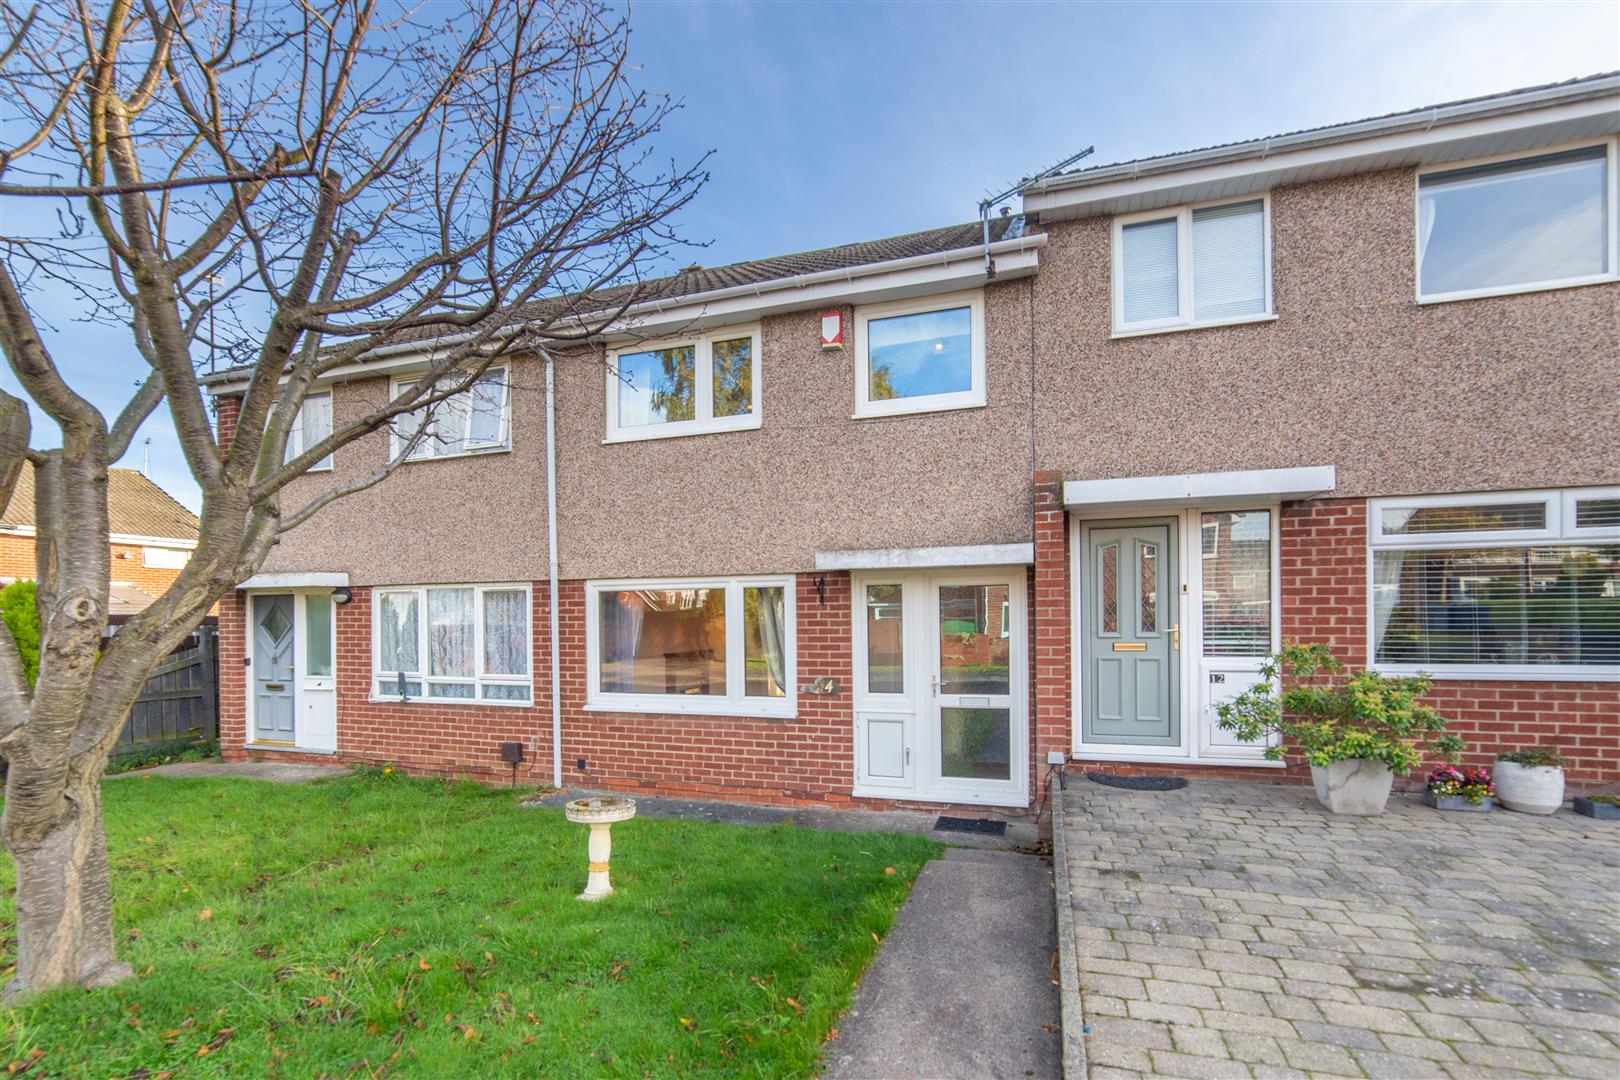 3 bed terraced house for sale in Englefield Close, Kingston Park, NE3 